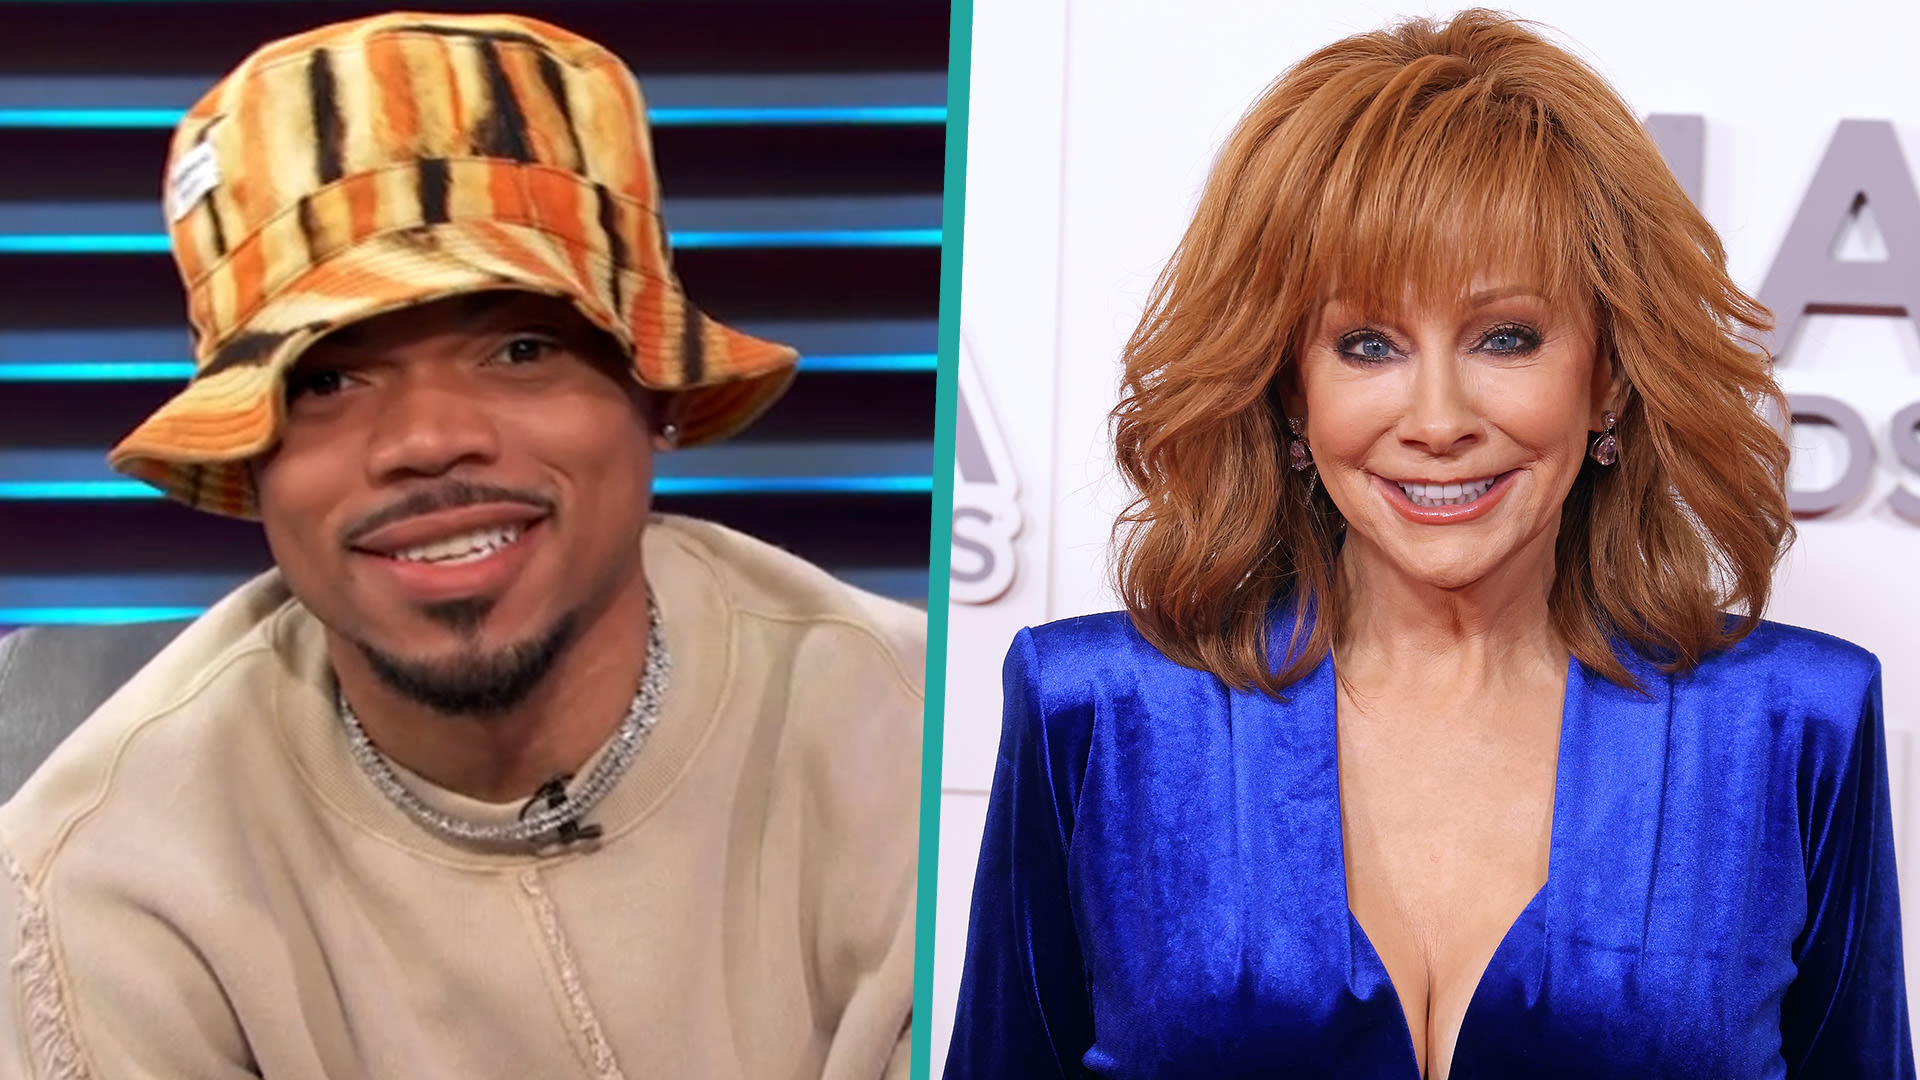 Chance The Rapper Says Reba McEntire Is Very 'Persistent' On Asking Him For Rap Lessons | Access